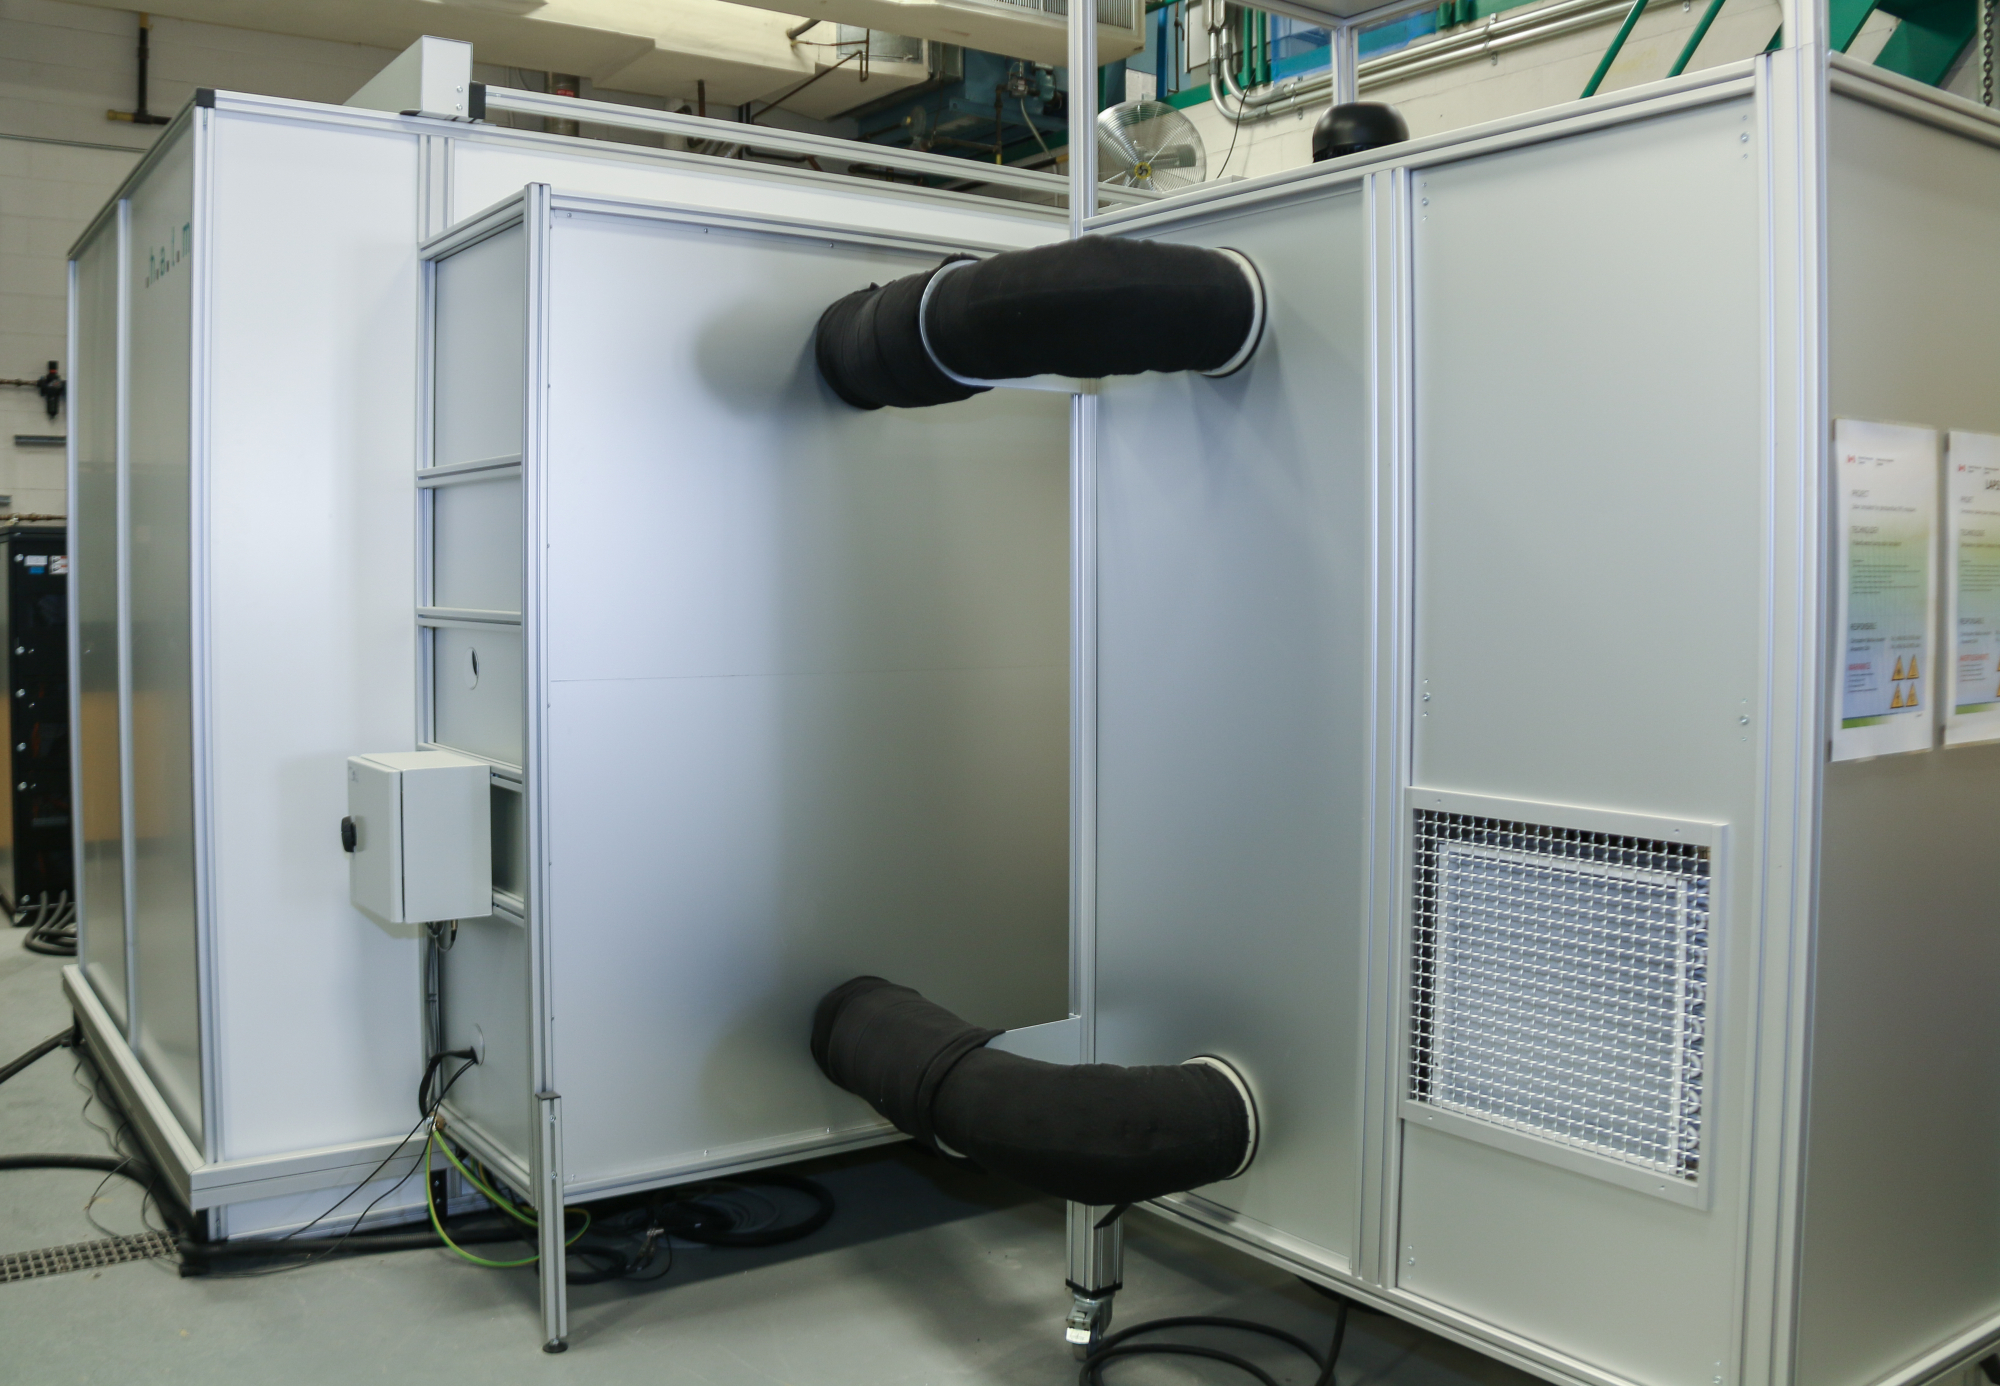 The image shows a view of the solar simulator test bench in the pilot plant at CanmetENERGY in Varennes.